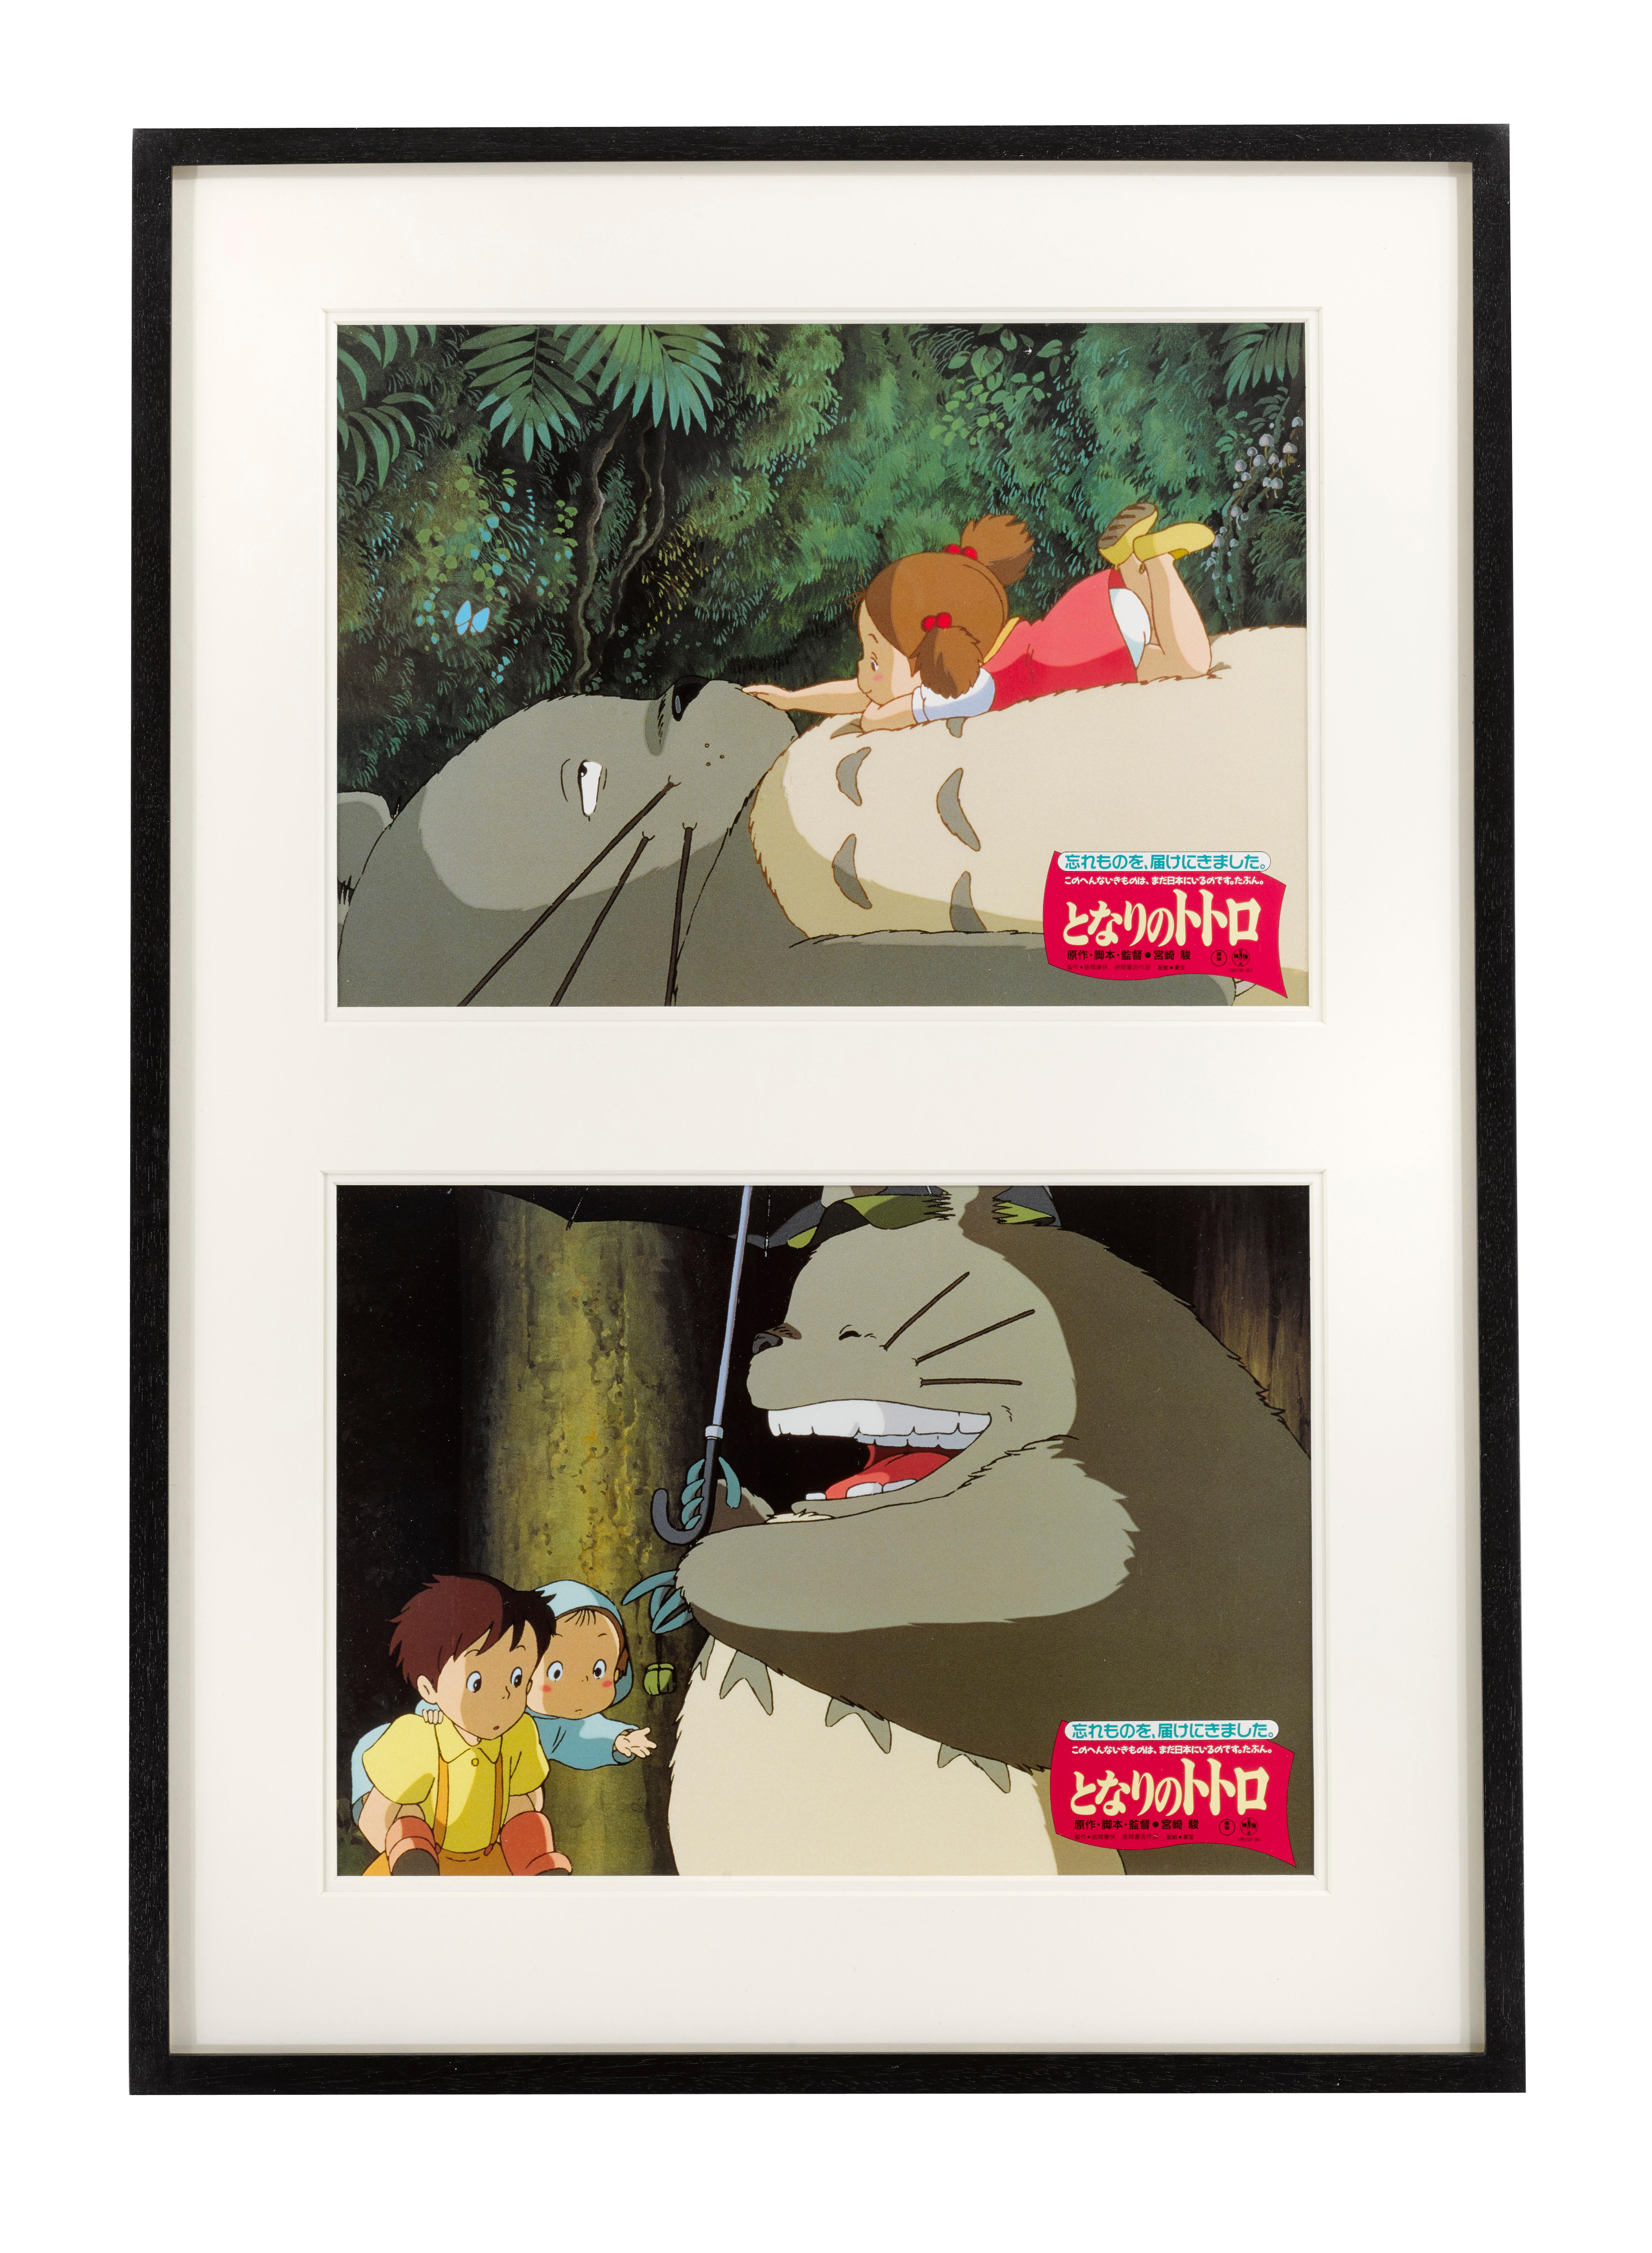 Two Original Japanese Lobby cards poster for the 1988 studio Ghibli animation.
Hayao Miyazaki, one of the founders of Studio Ghibli, wrote and directed this film. Studio Ghibli, which was founded in 1985, has been responsible for making so many